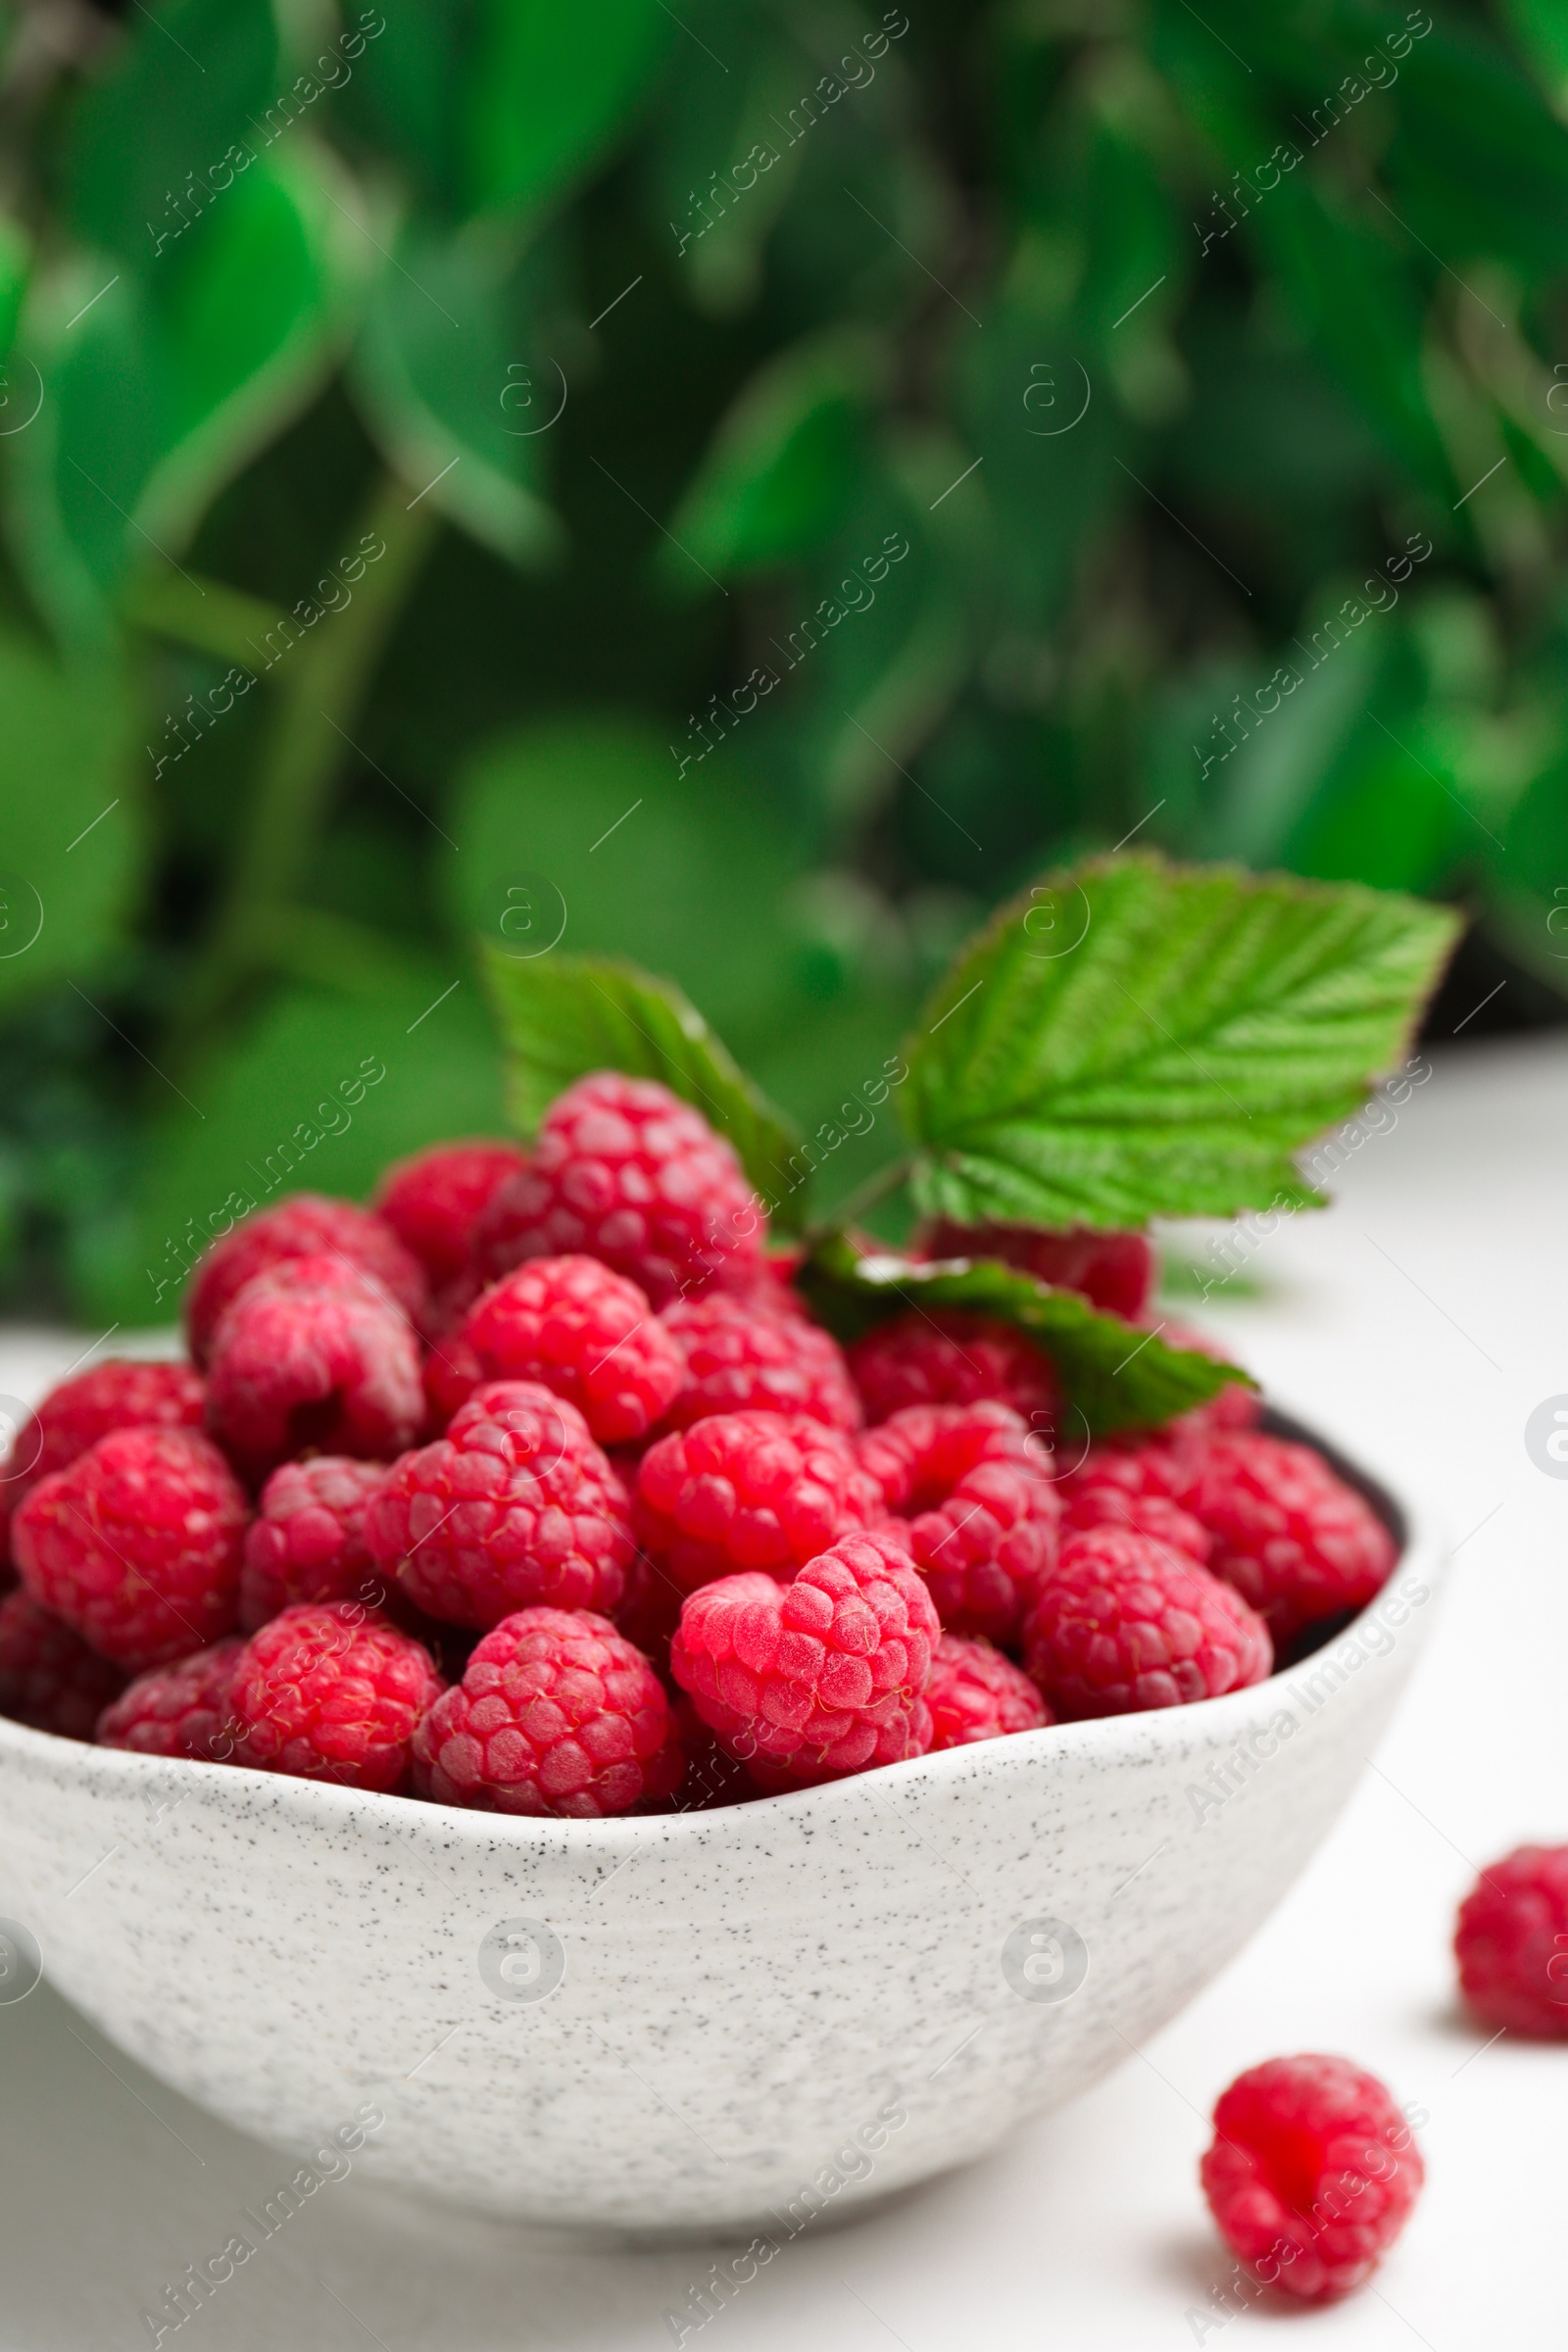 Photo of Bowl of fresh ripe raspberries with green leaves on white table against blurred background, closeup. Space for text